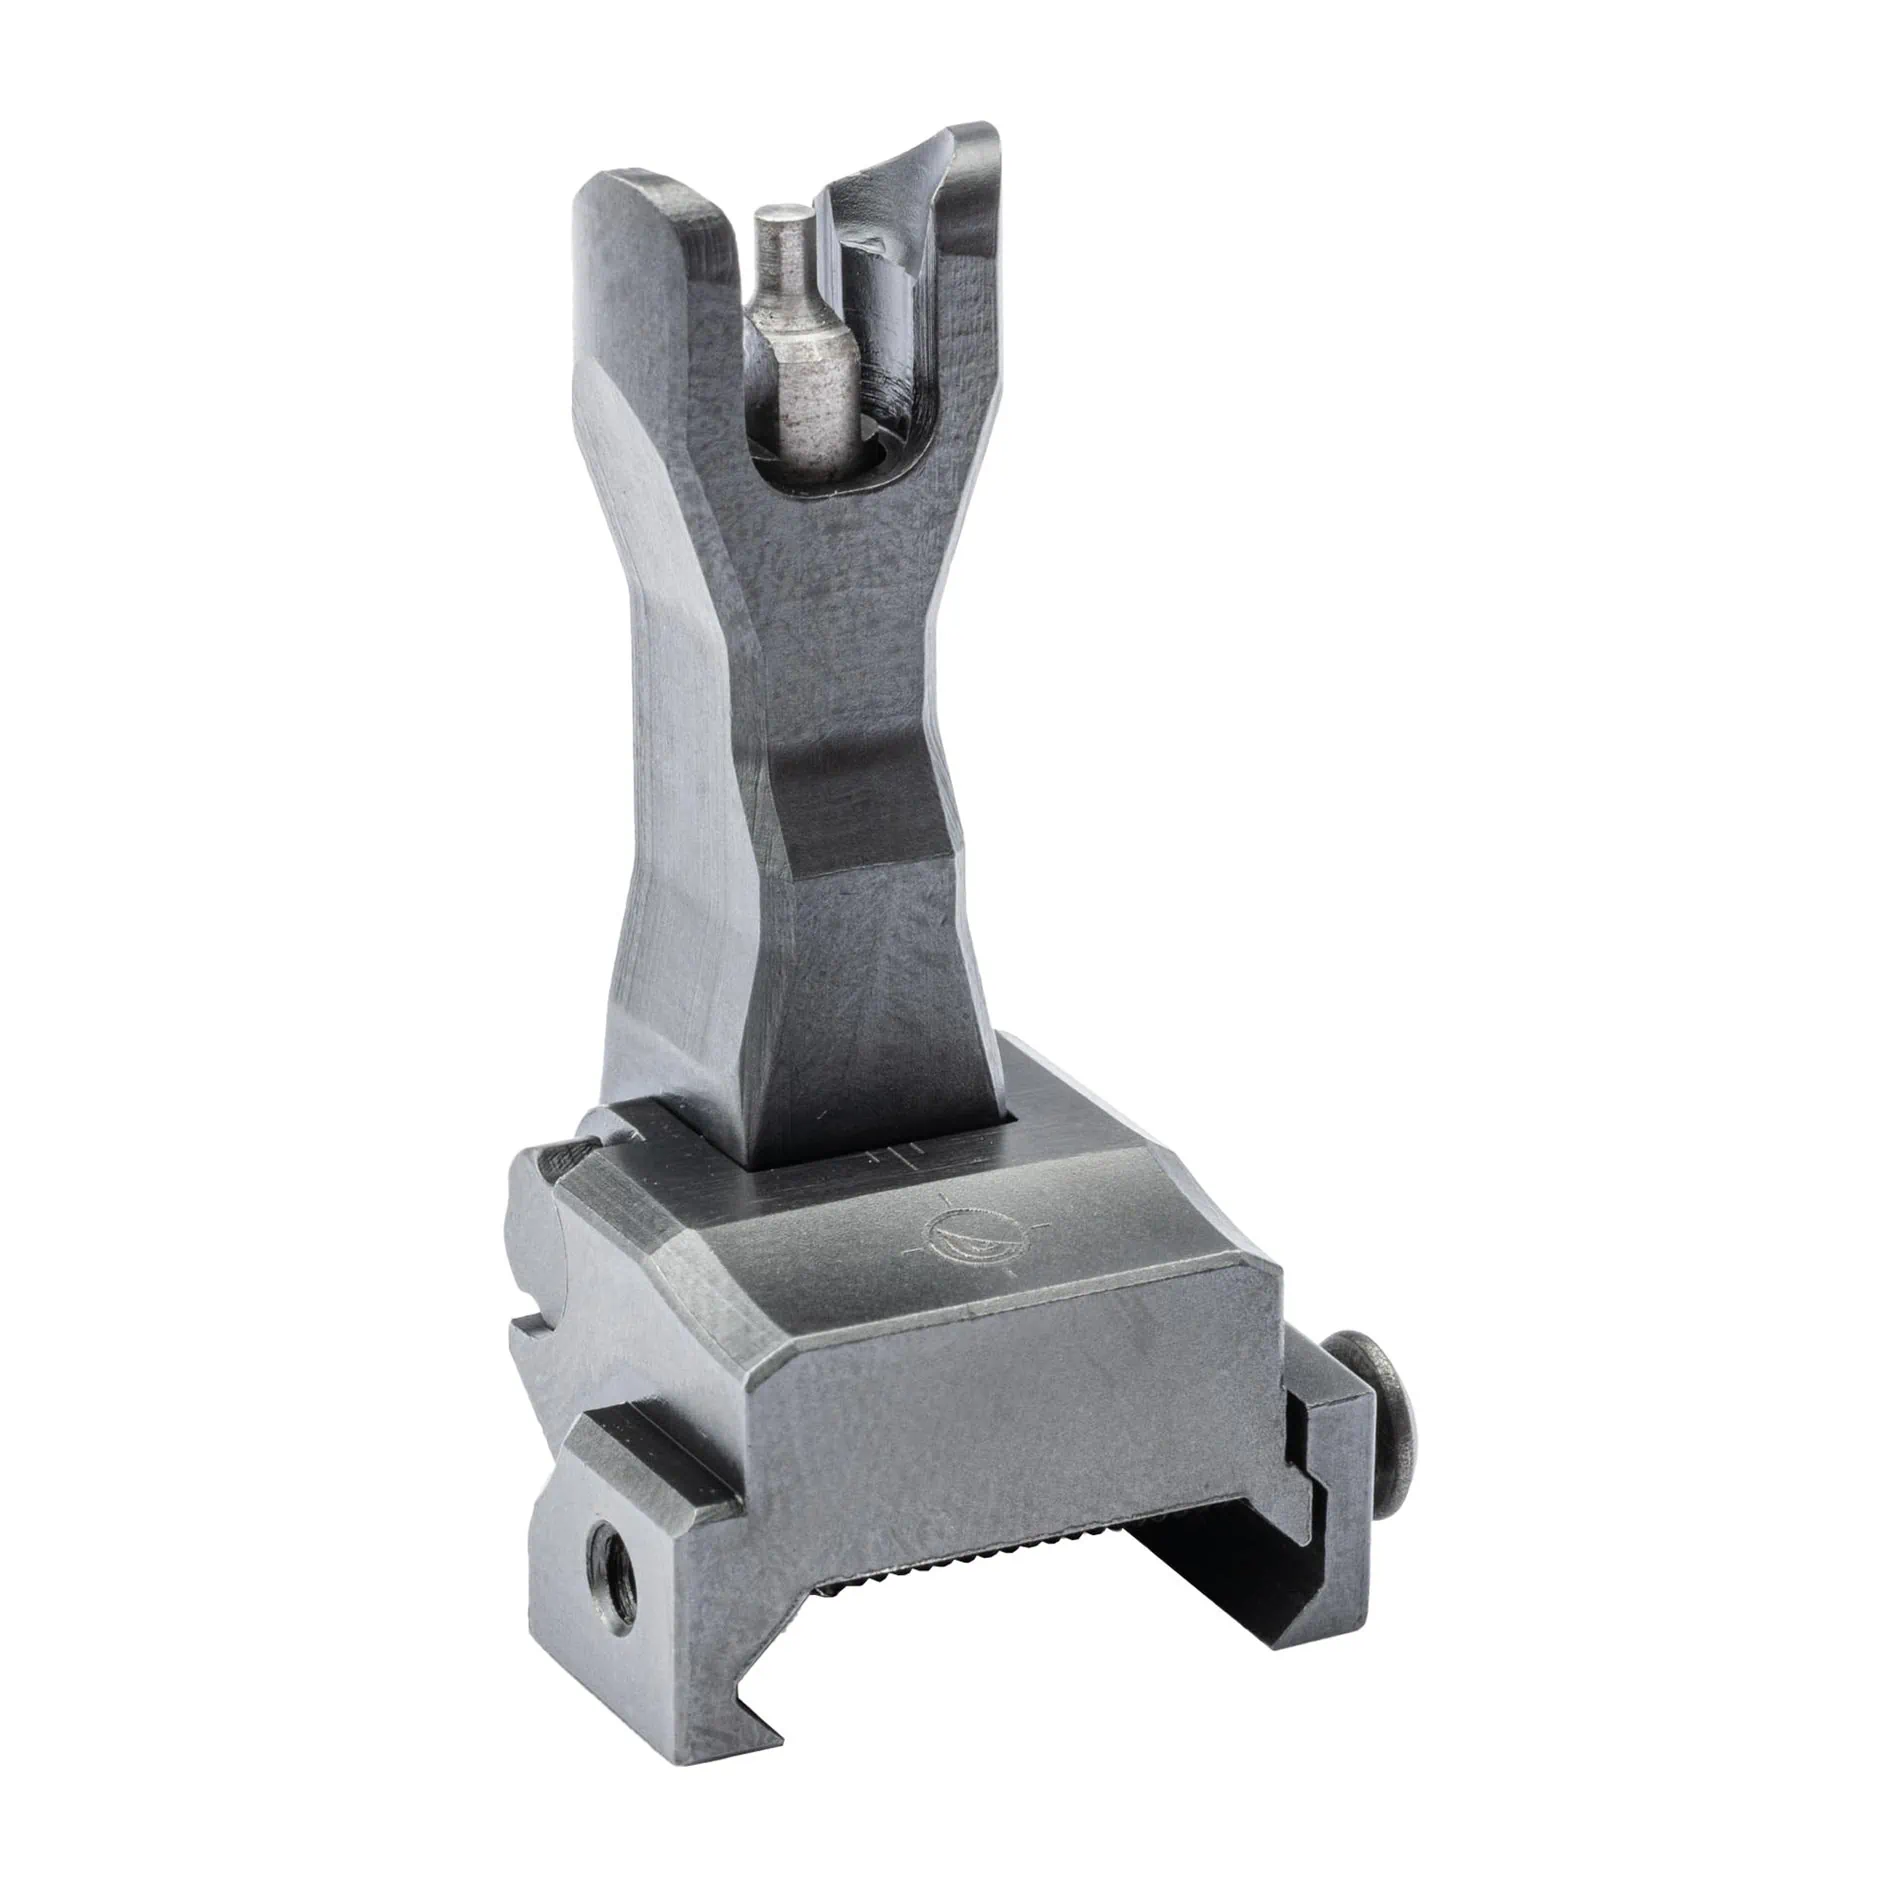 Mission First Tactical Extreme Duty AR-15 Backup Front Sight - AT3 Tactical